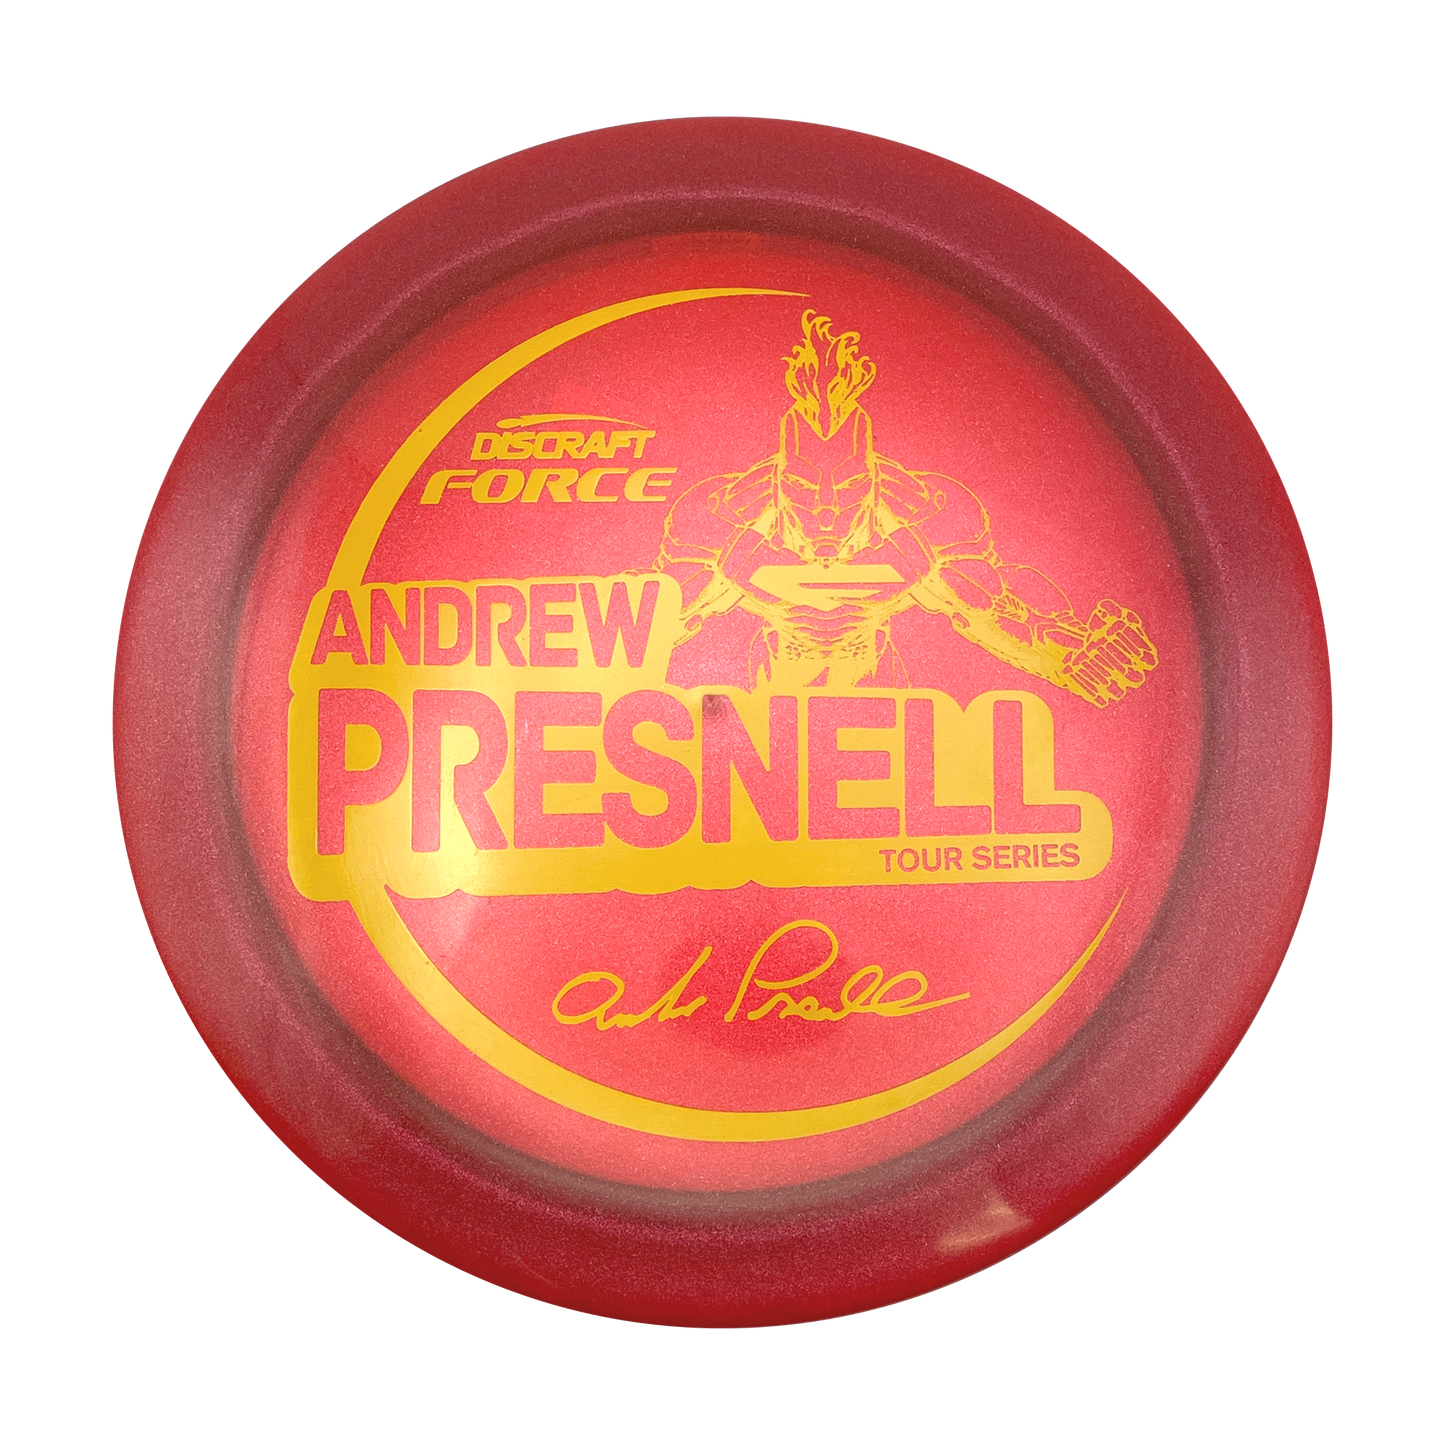 Discraft Force - Andrew Presnell - Tour Series - Z Line - Red